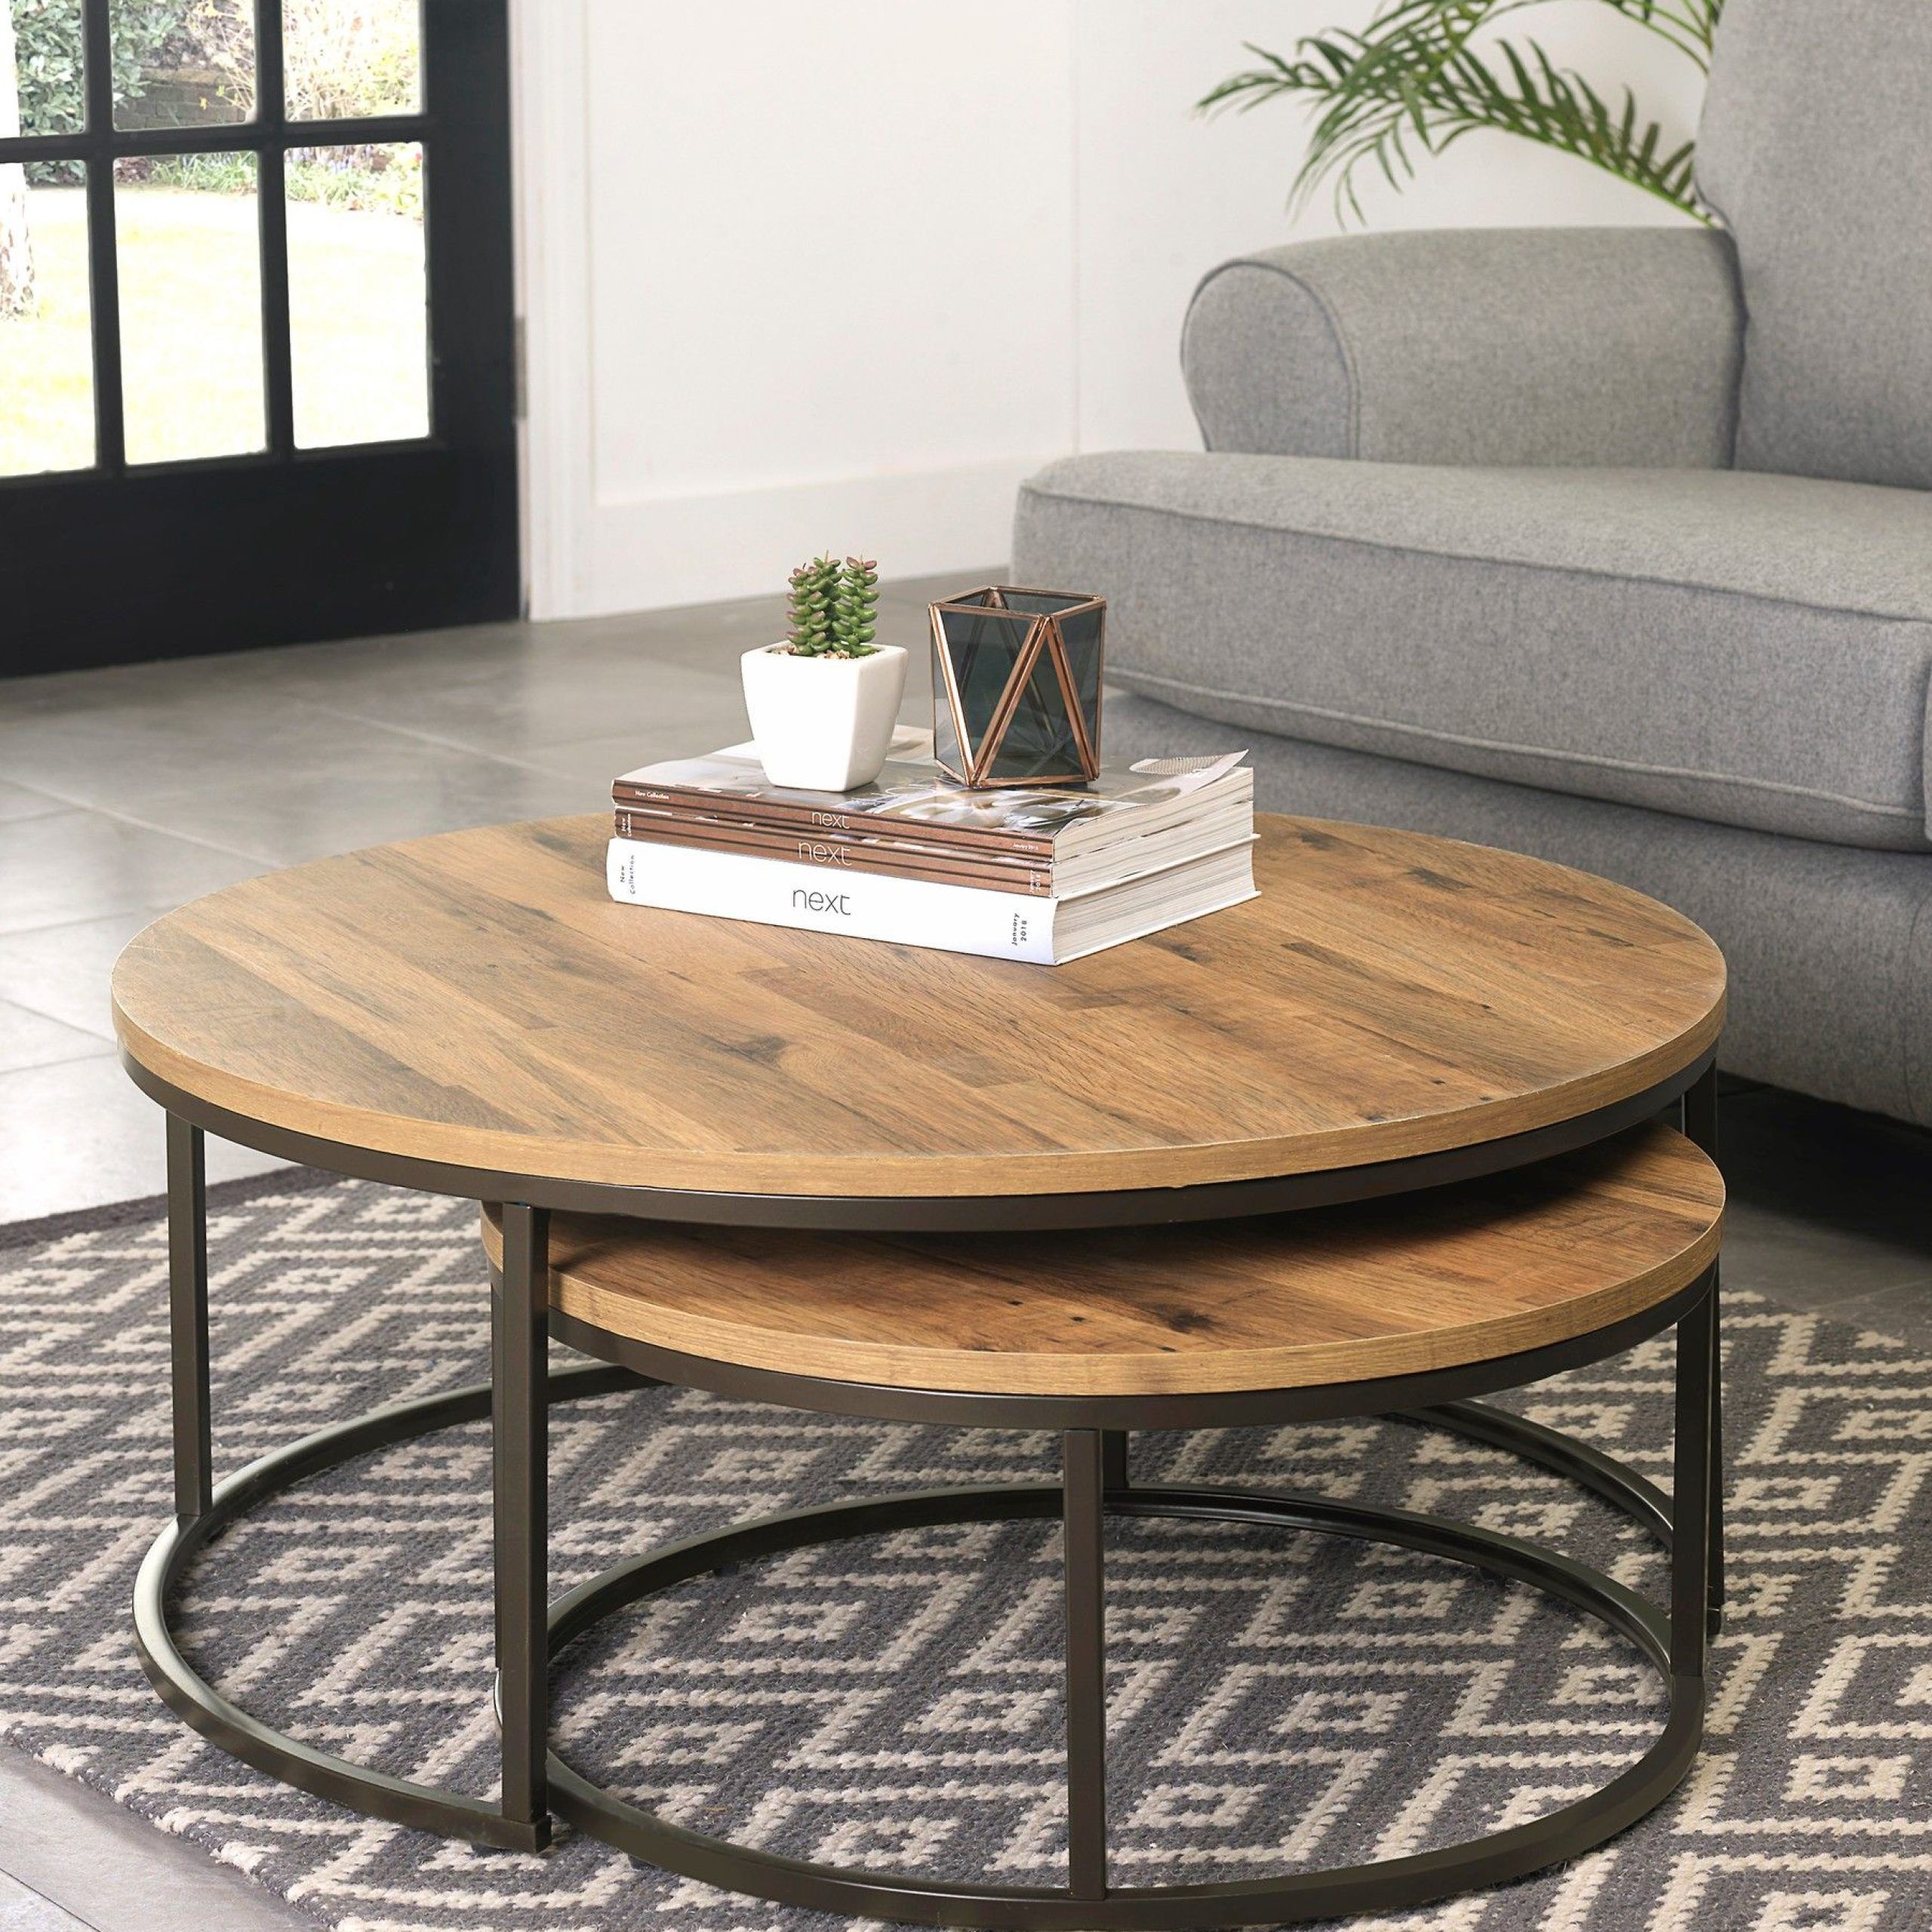 Bronx Round Coffee Nest Of Tables | Modern Coffee Table Decor For Nesting Coffee Tables (View 15 of 20)